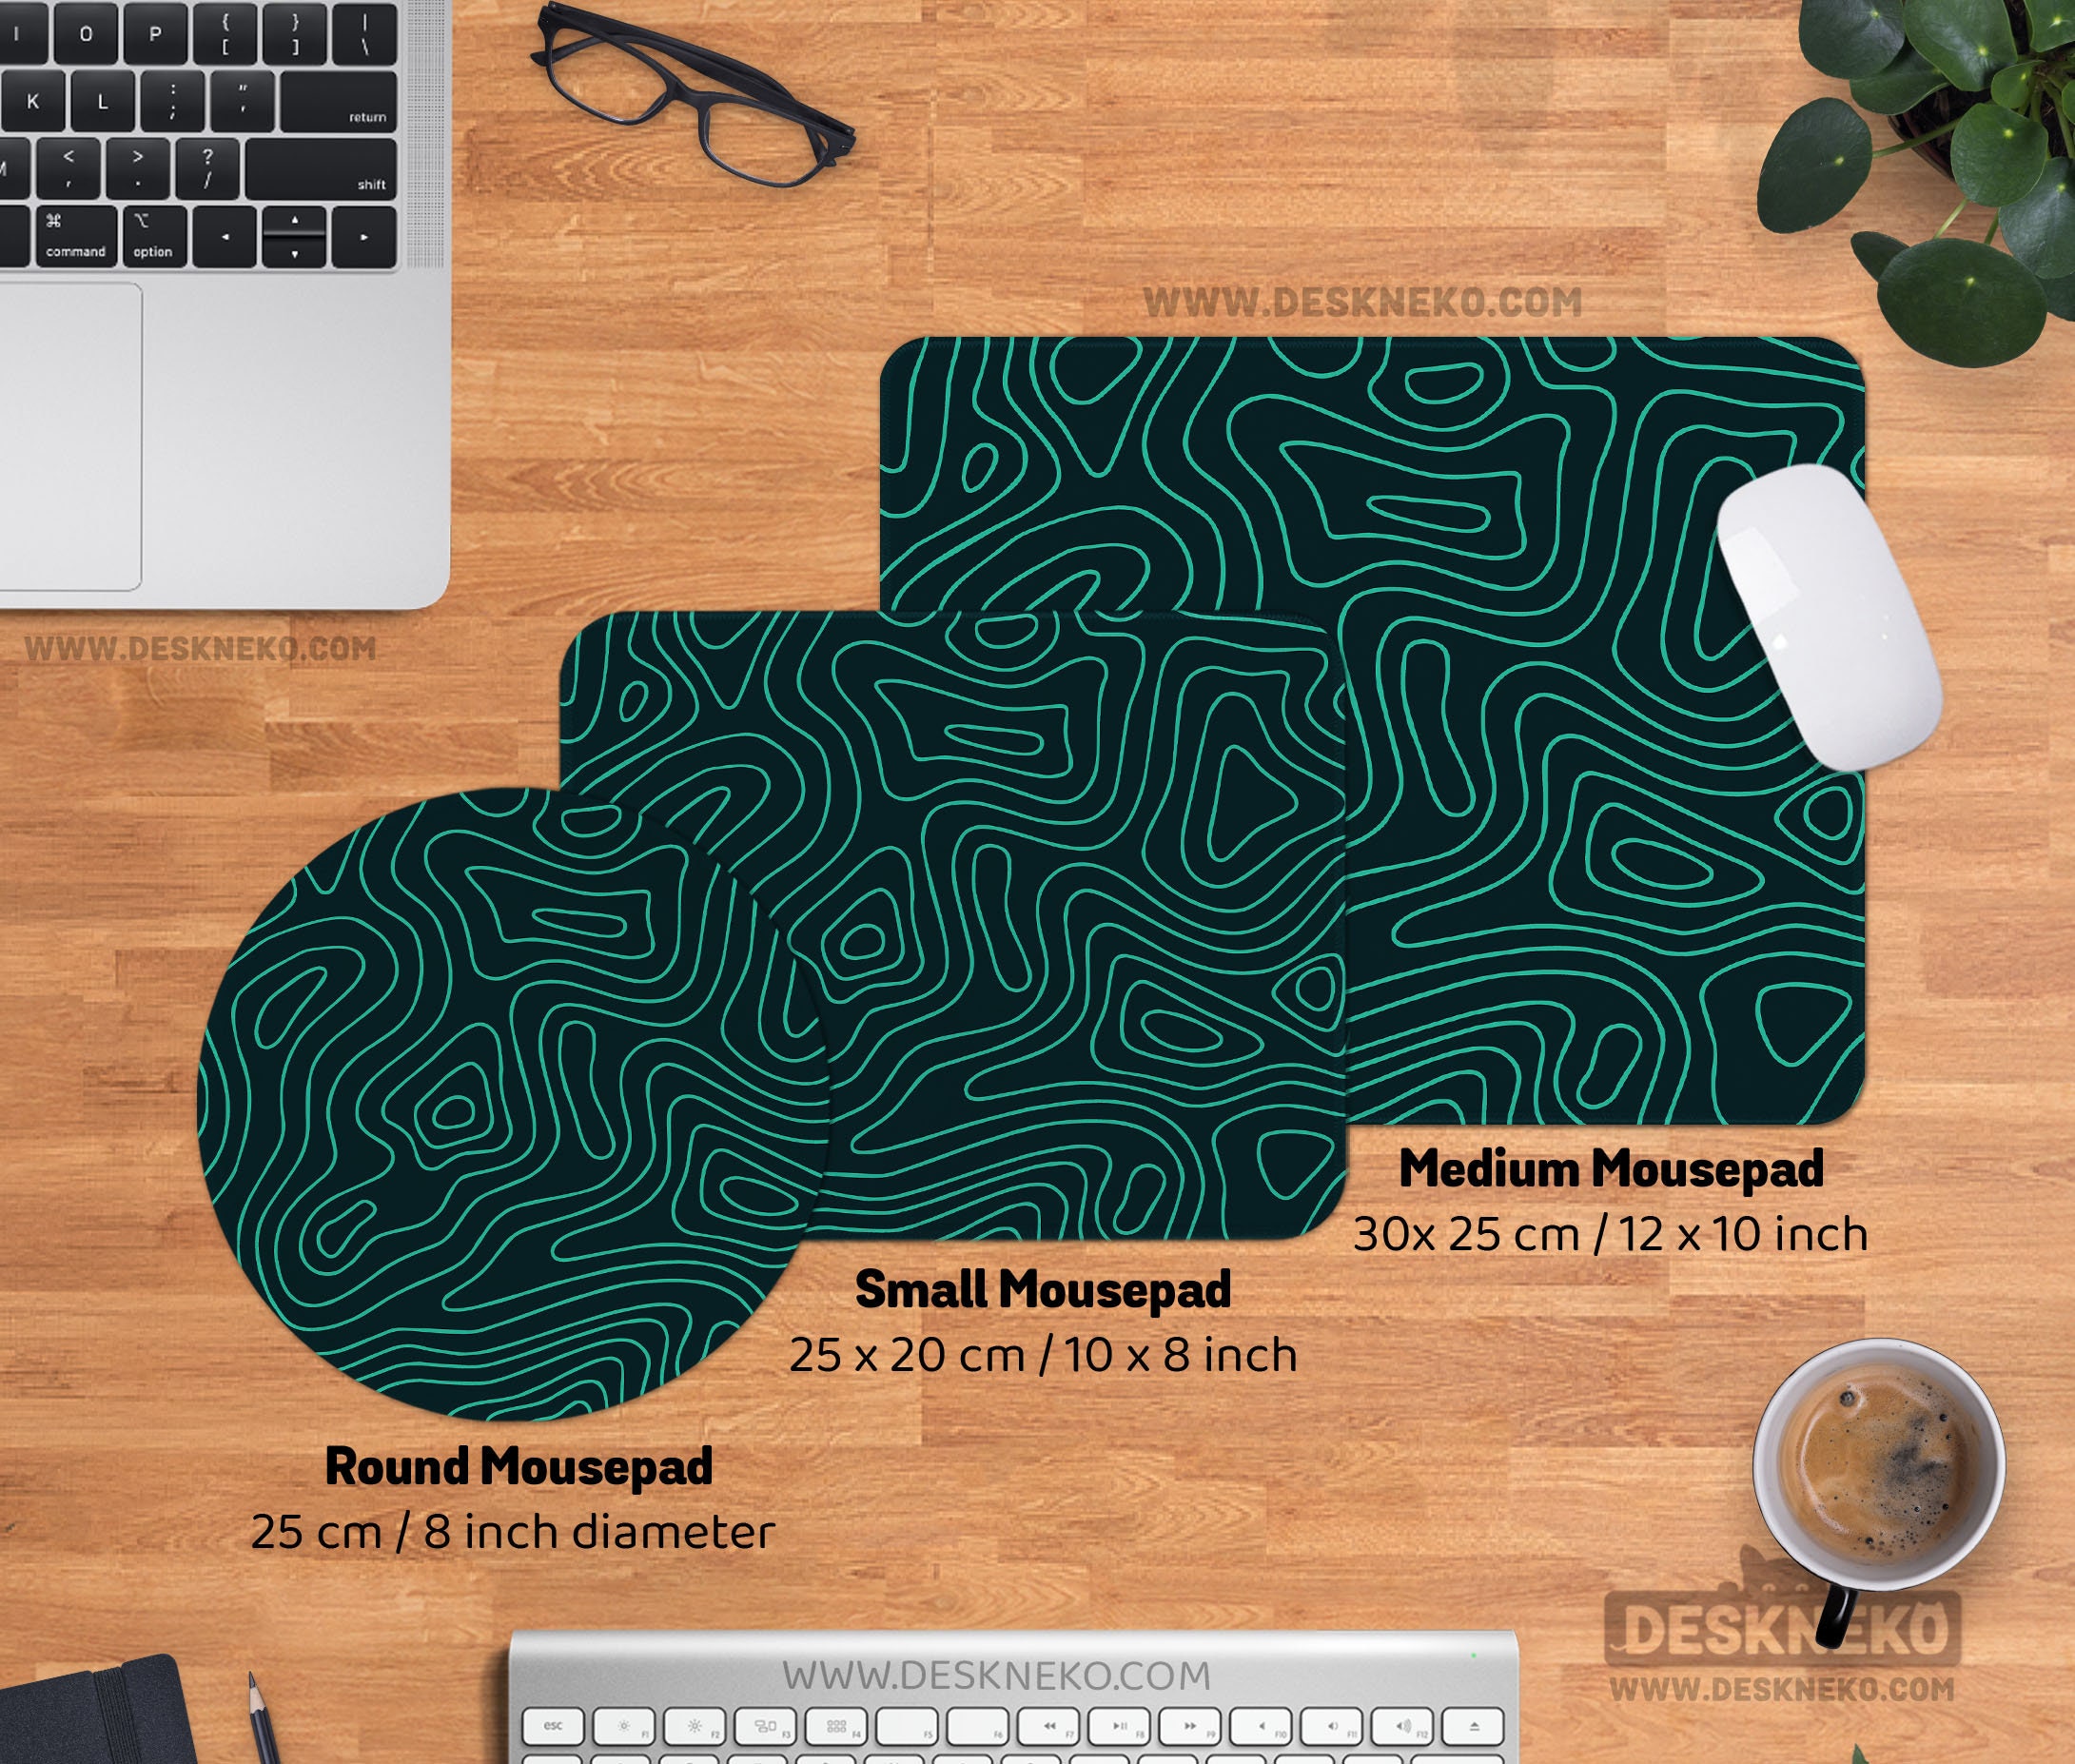 Topographic Mouse Pad, Extended Gaming Mouse Pad, Topographic Desk Mat  Laptop Waterproof Desk Decor Writing Pad for Work, Game, Office, Home 